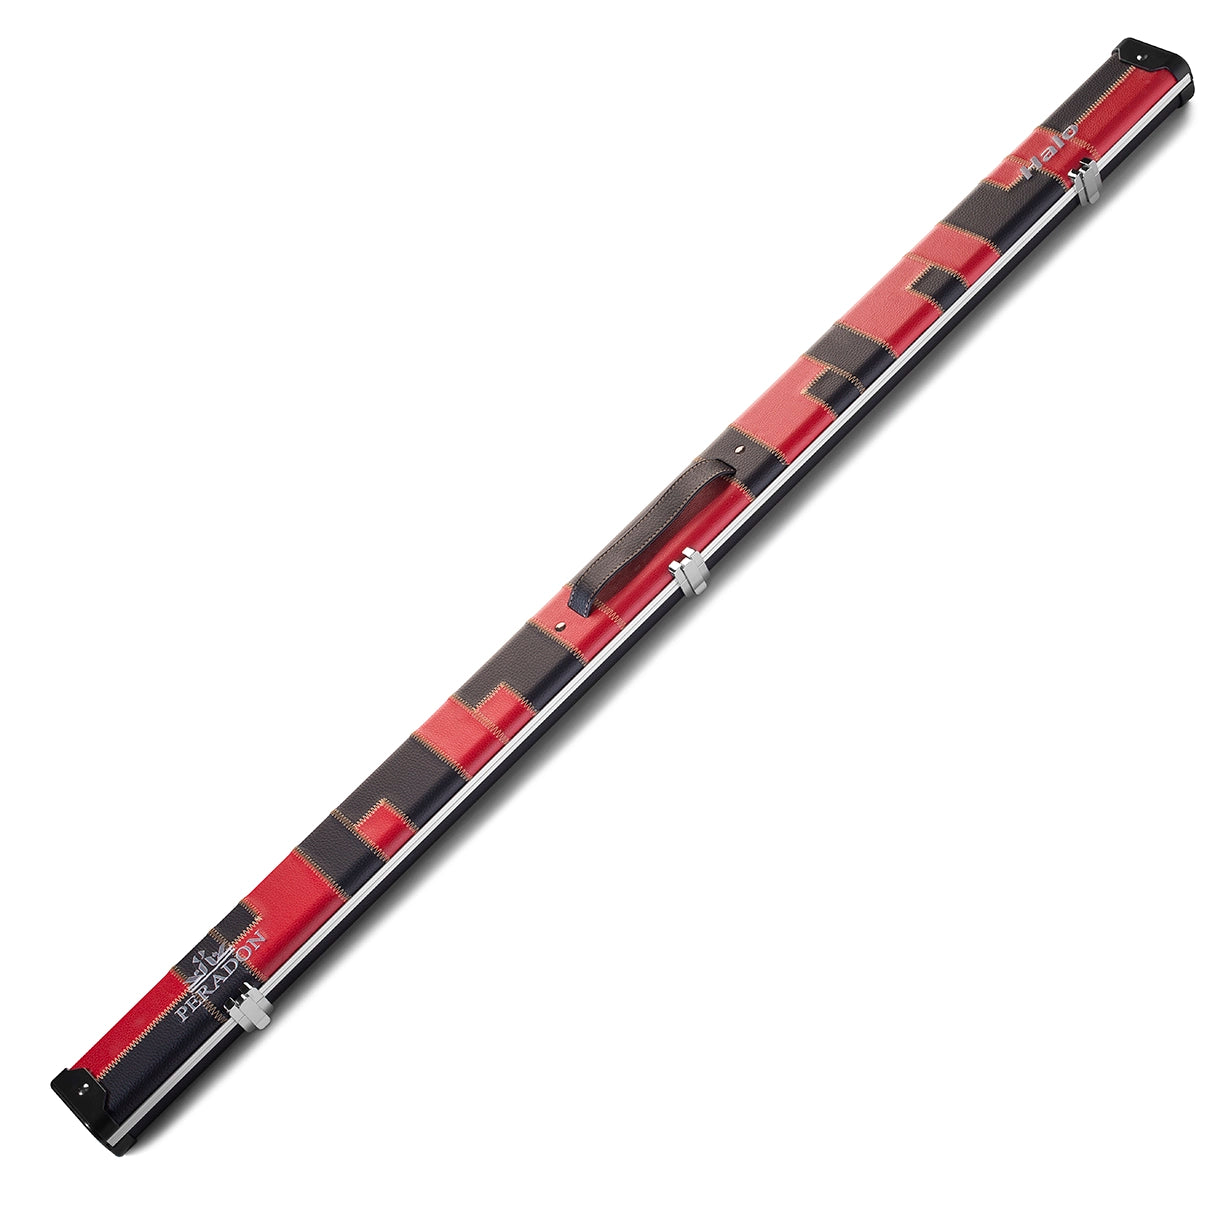 Peradon Black Red Patch Halo Case for 3/4 Cues. Full lengh view